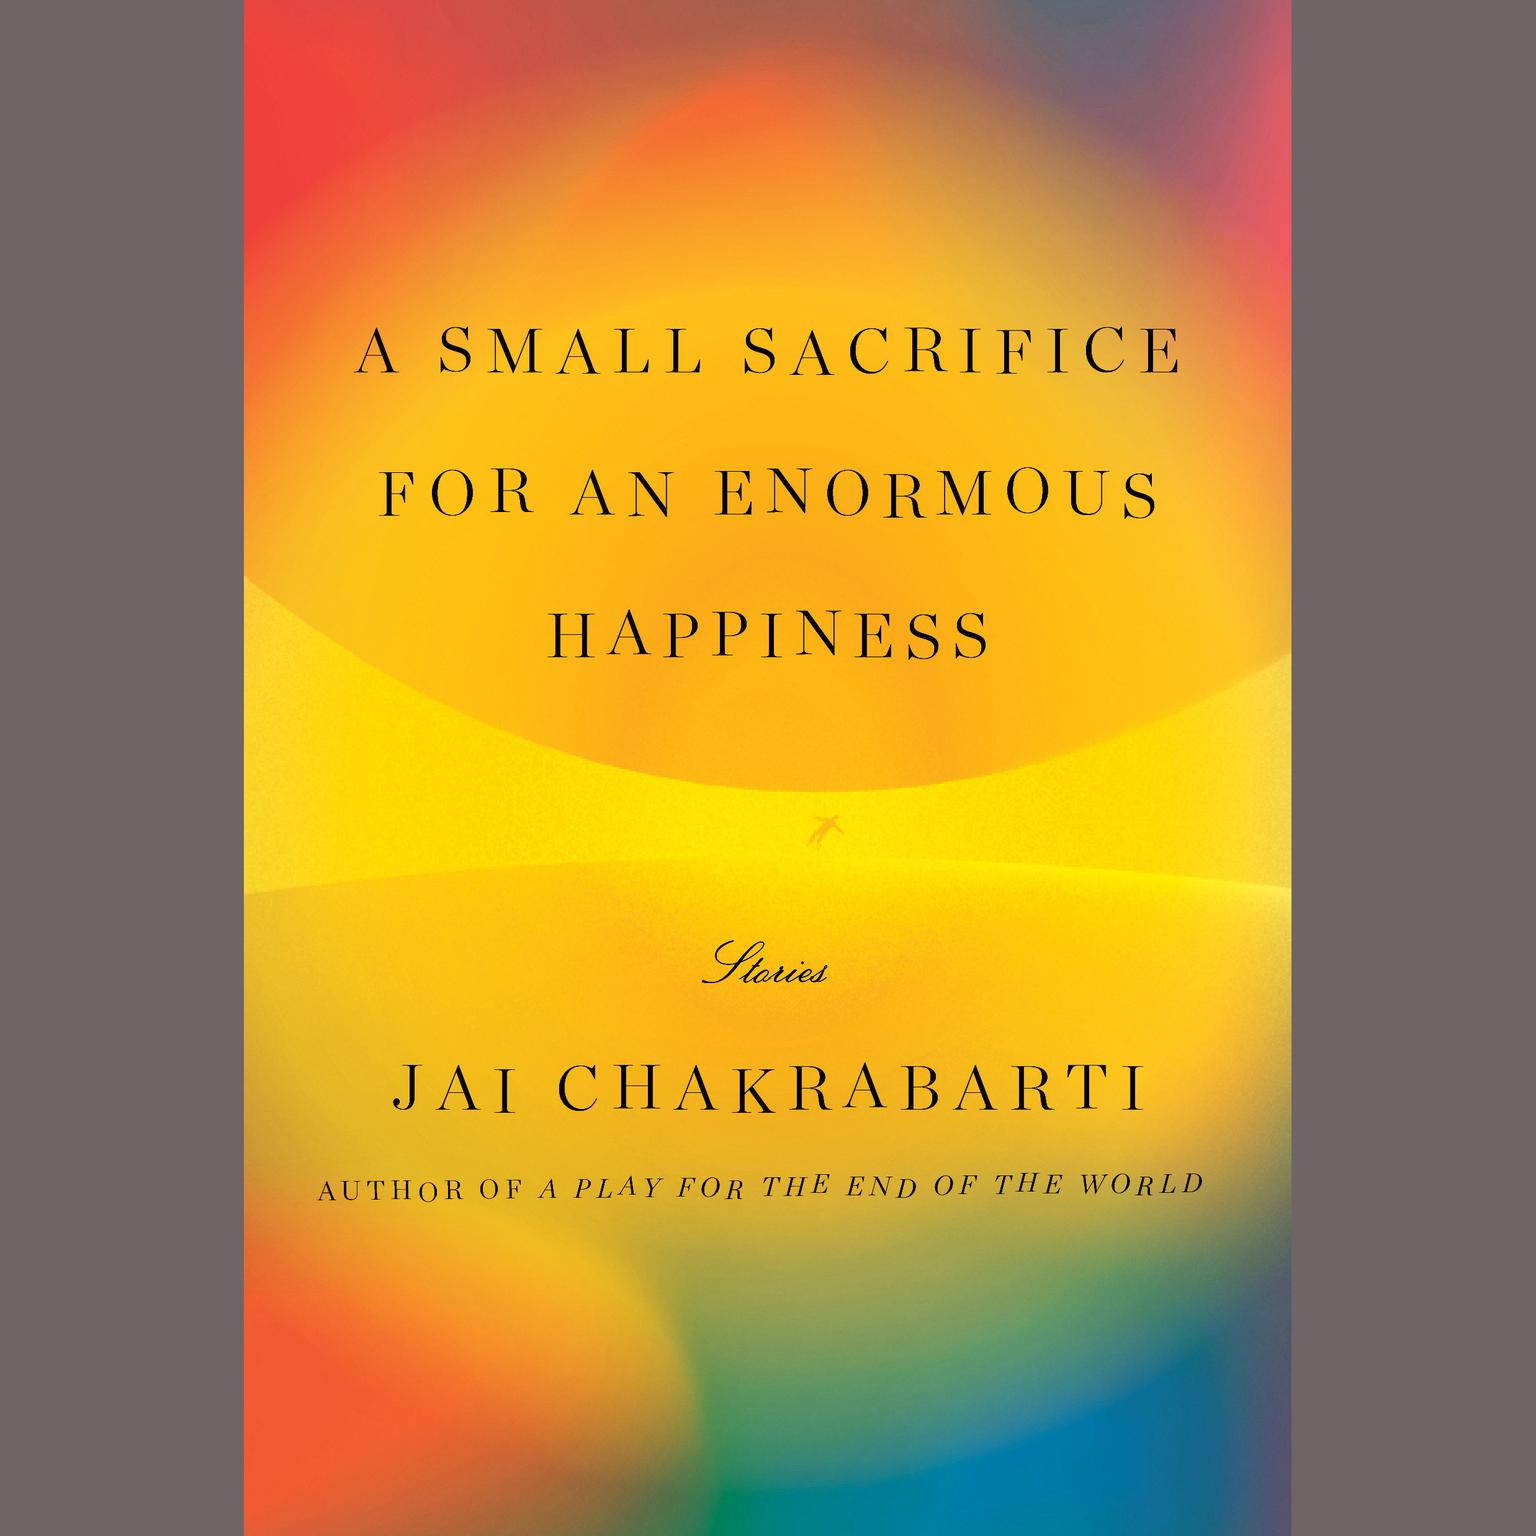 A Small Sacrifice for an Enormous Happiness: Stories Audiobook, by Jai Chakrabarti